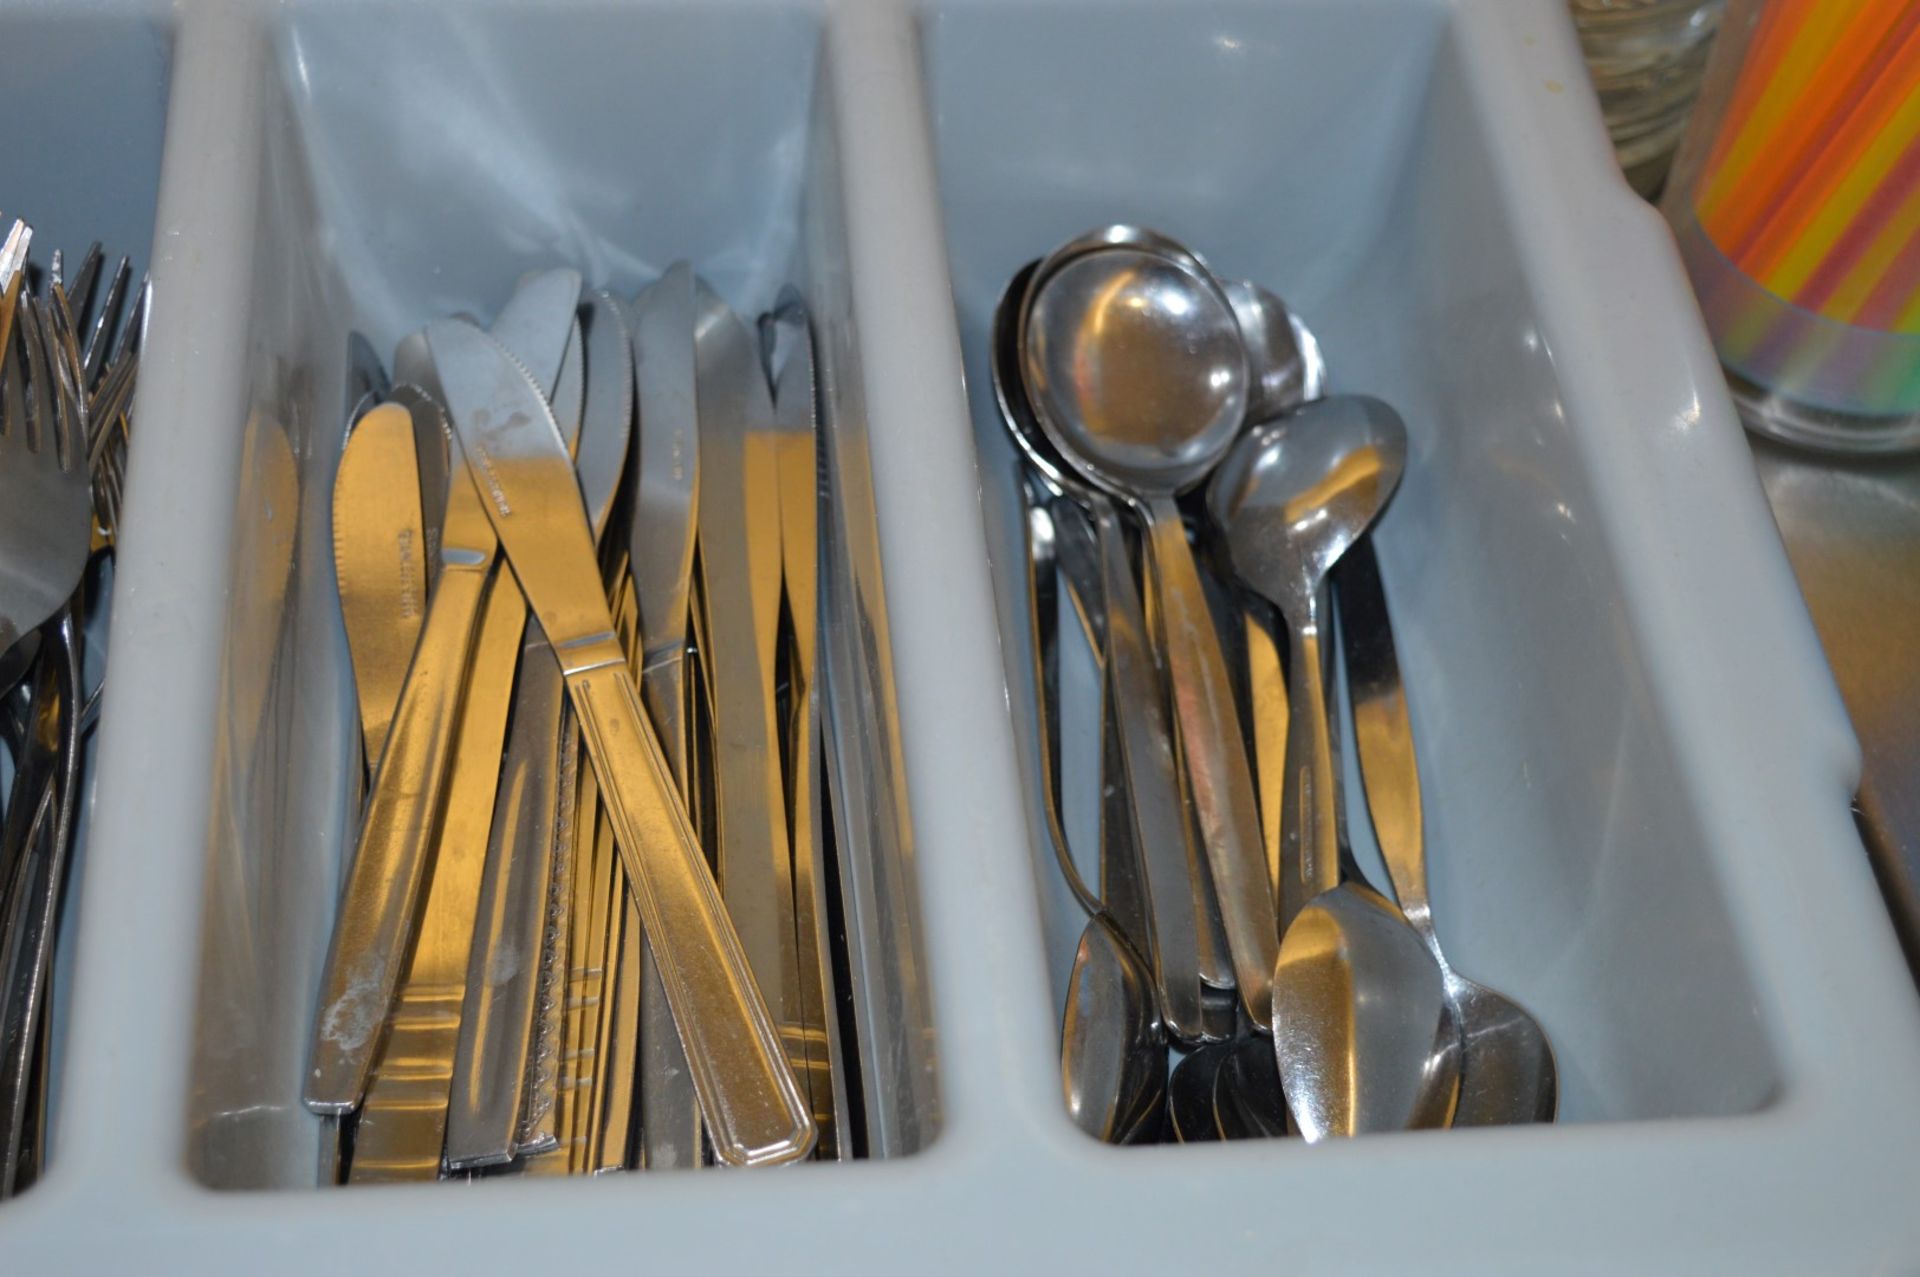 220 x Various Pieces of Cutlery Including Knives, Forks, Teaspoons, Desert Spoons and More - Large - Image 3 of 3